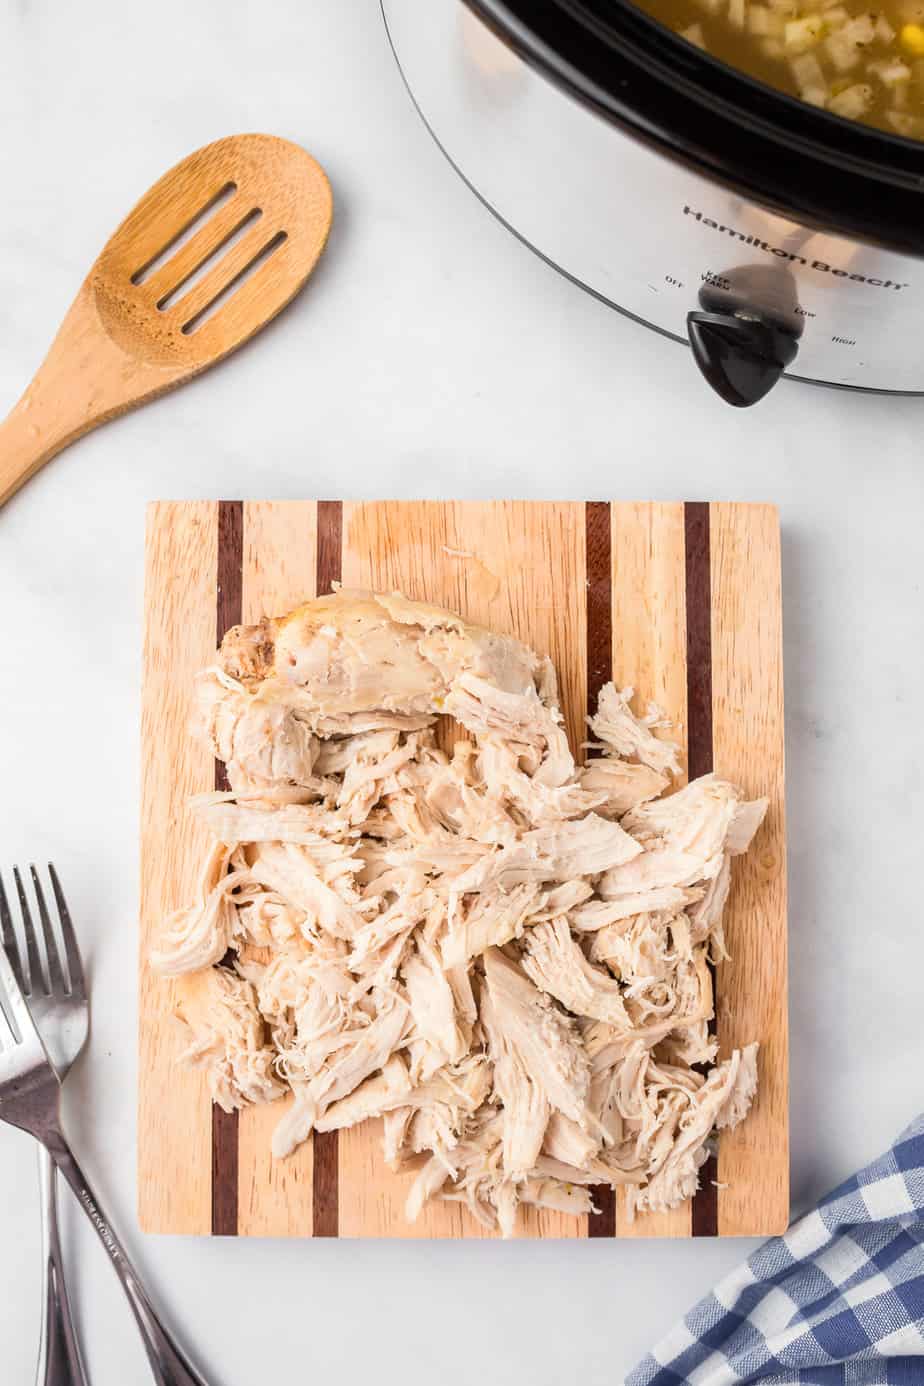 Chicken being shredded on a cutting board on a counter from overhead with a slow cooker, two forks and a wooden spoon nearby.